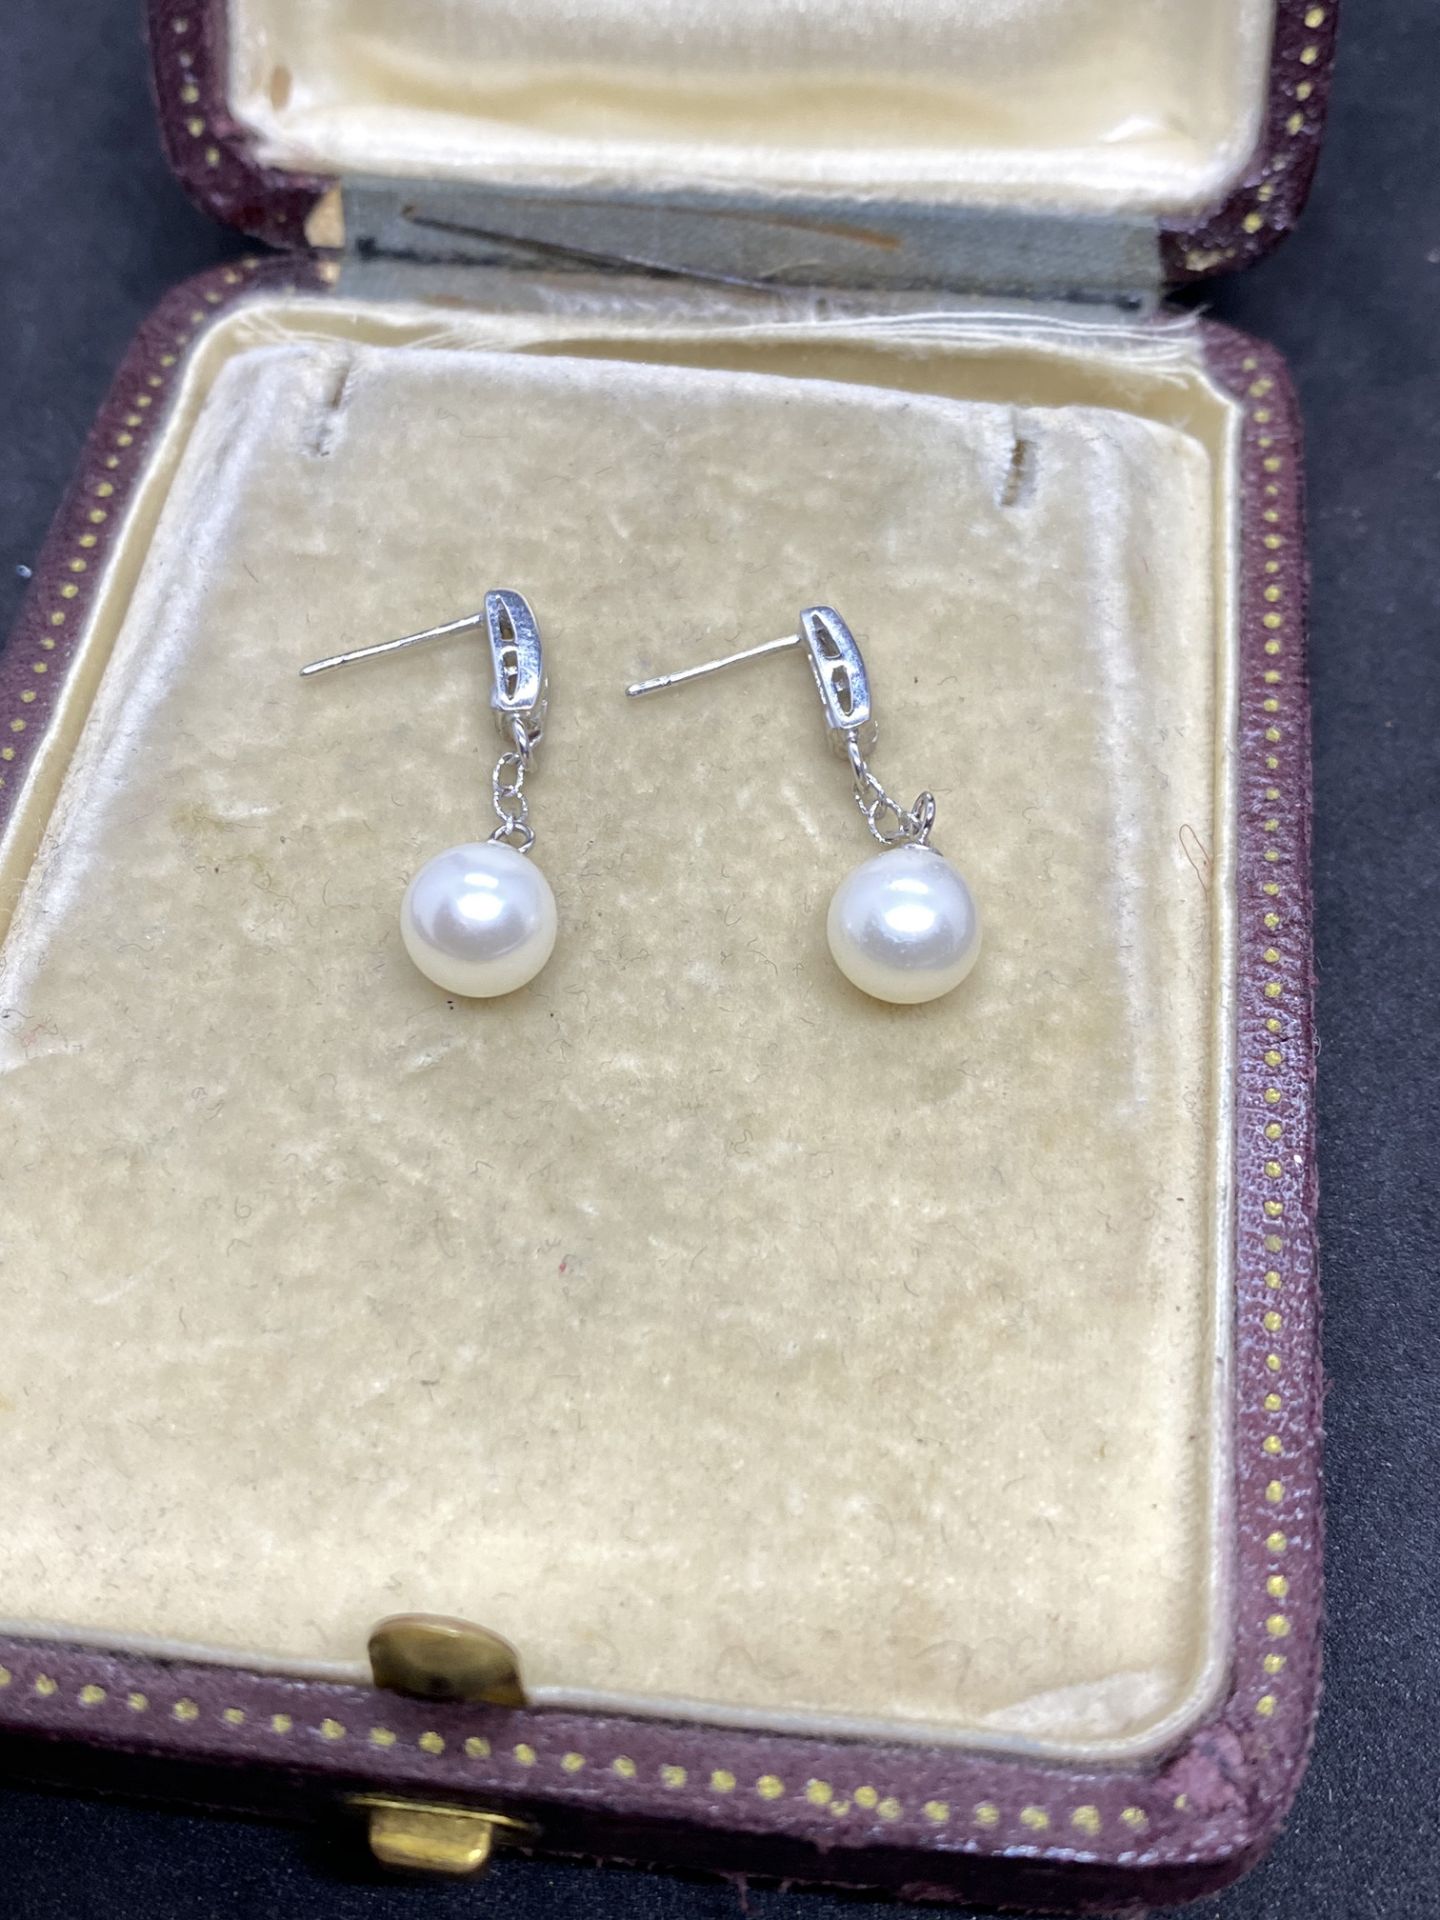 9ct White Gold Channel Set Diamond & Pearl Earrings - Image 6 of 6